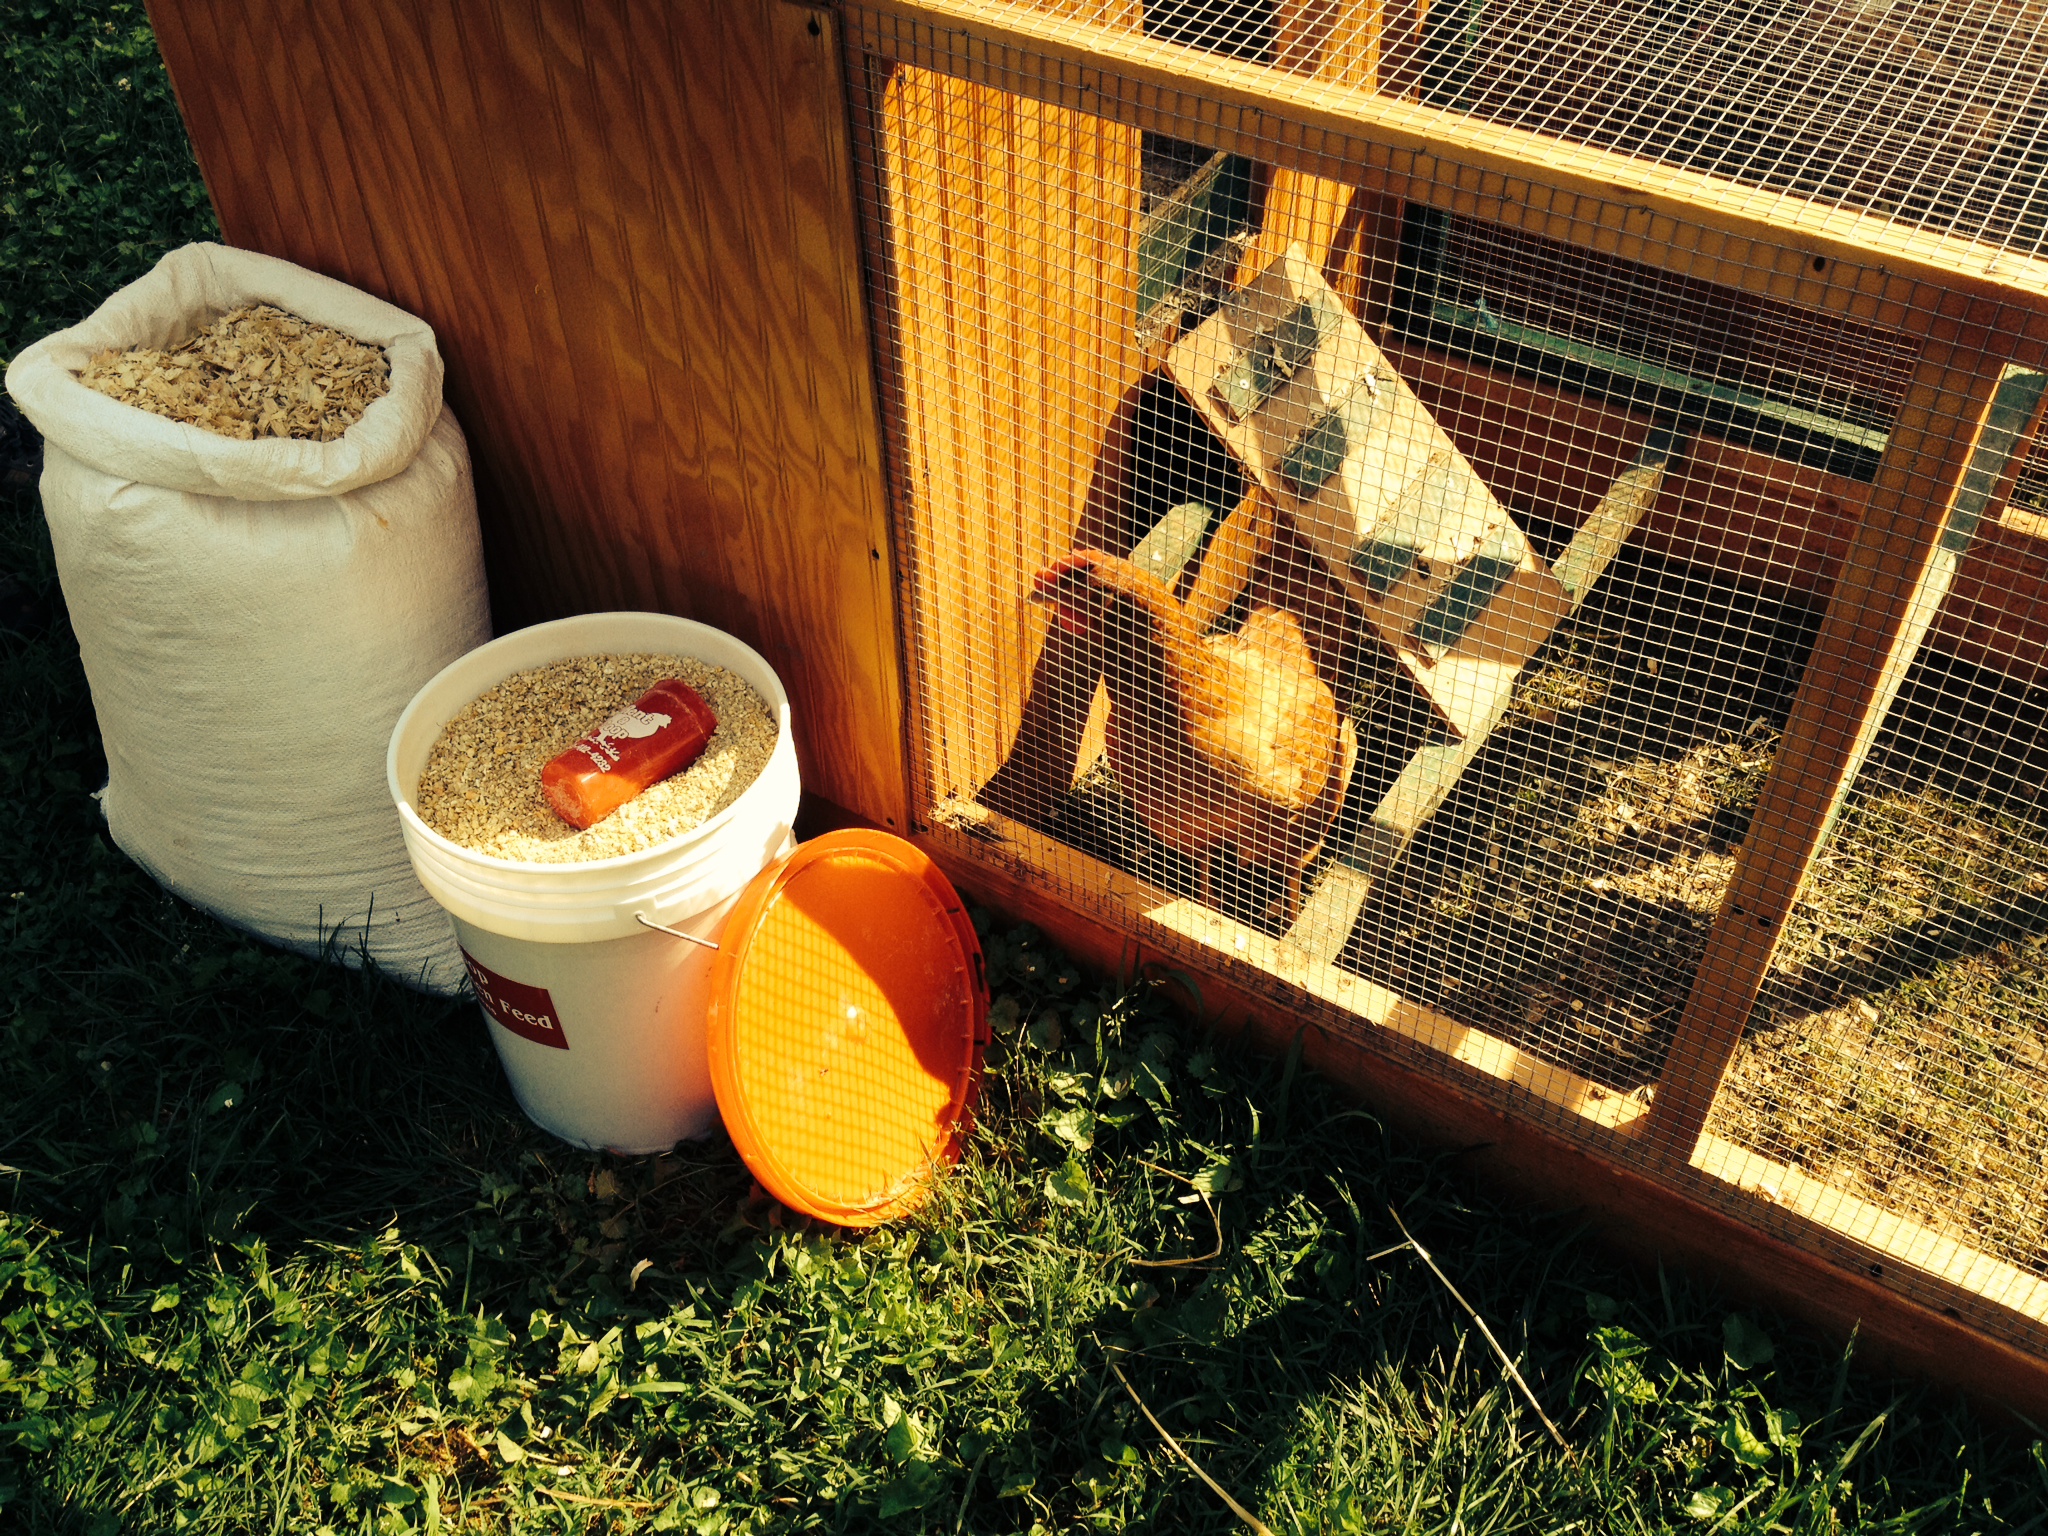 With Rent a Coop, chickens are the new ant farm